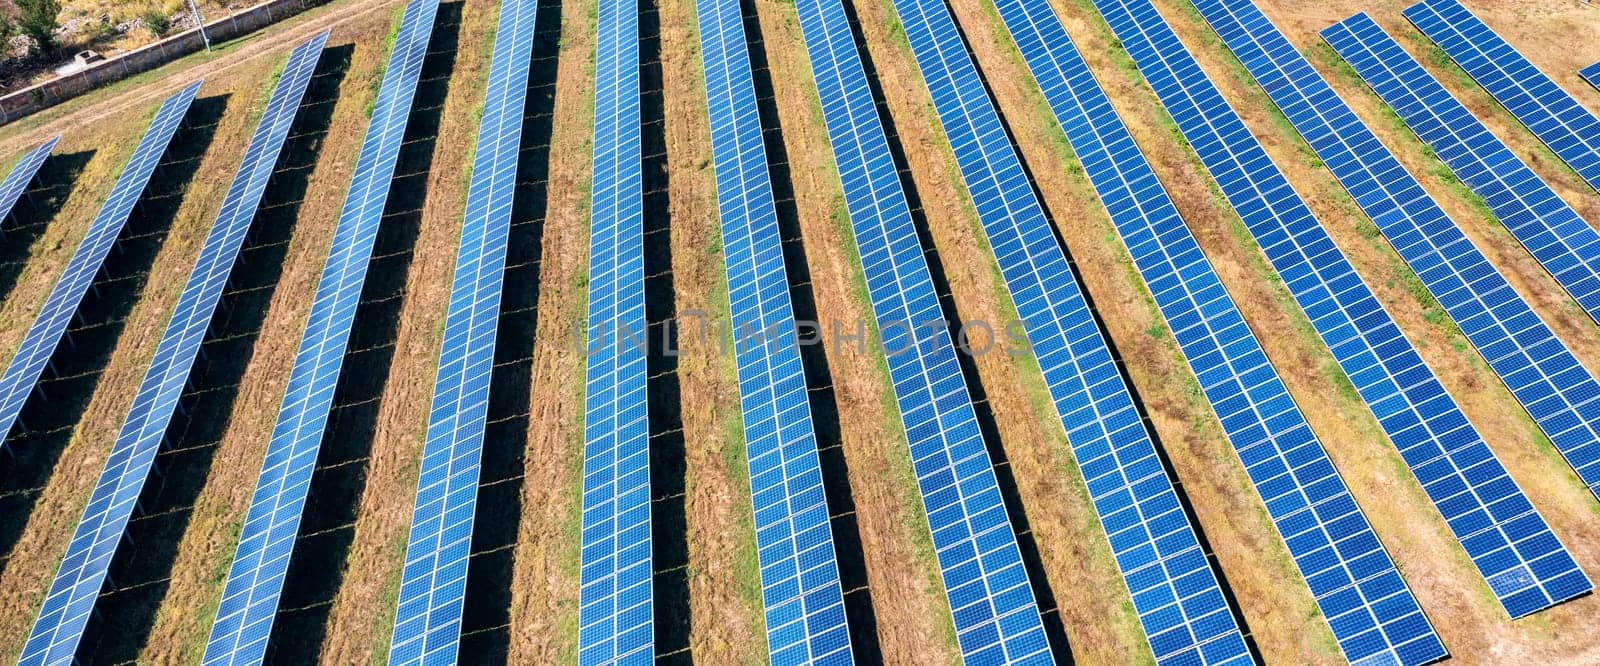 Panoramic view of solar energy photovoltaic power generation by EdVal